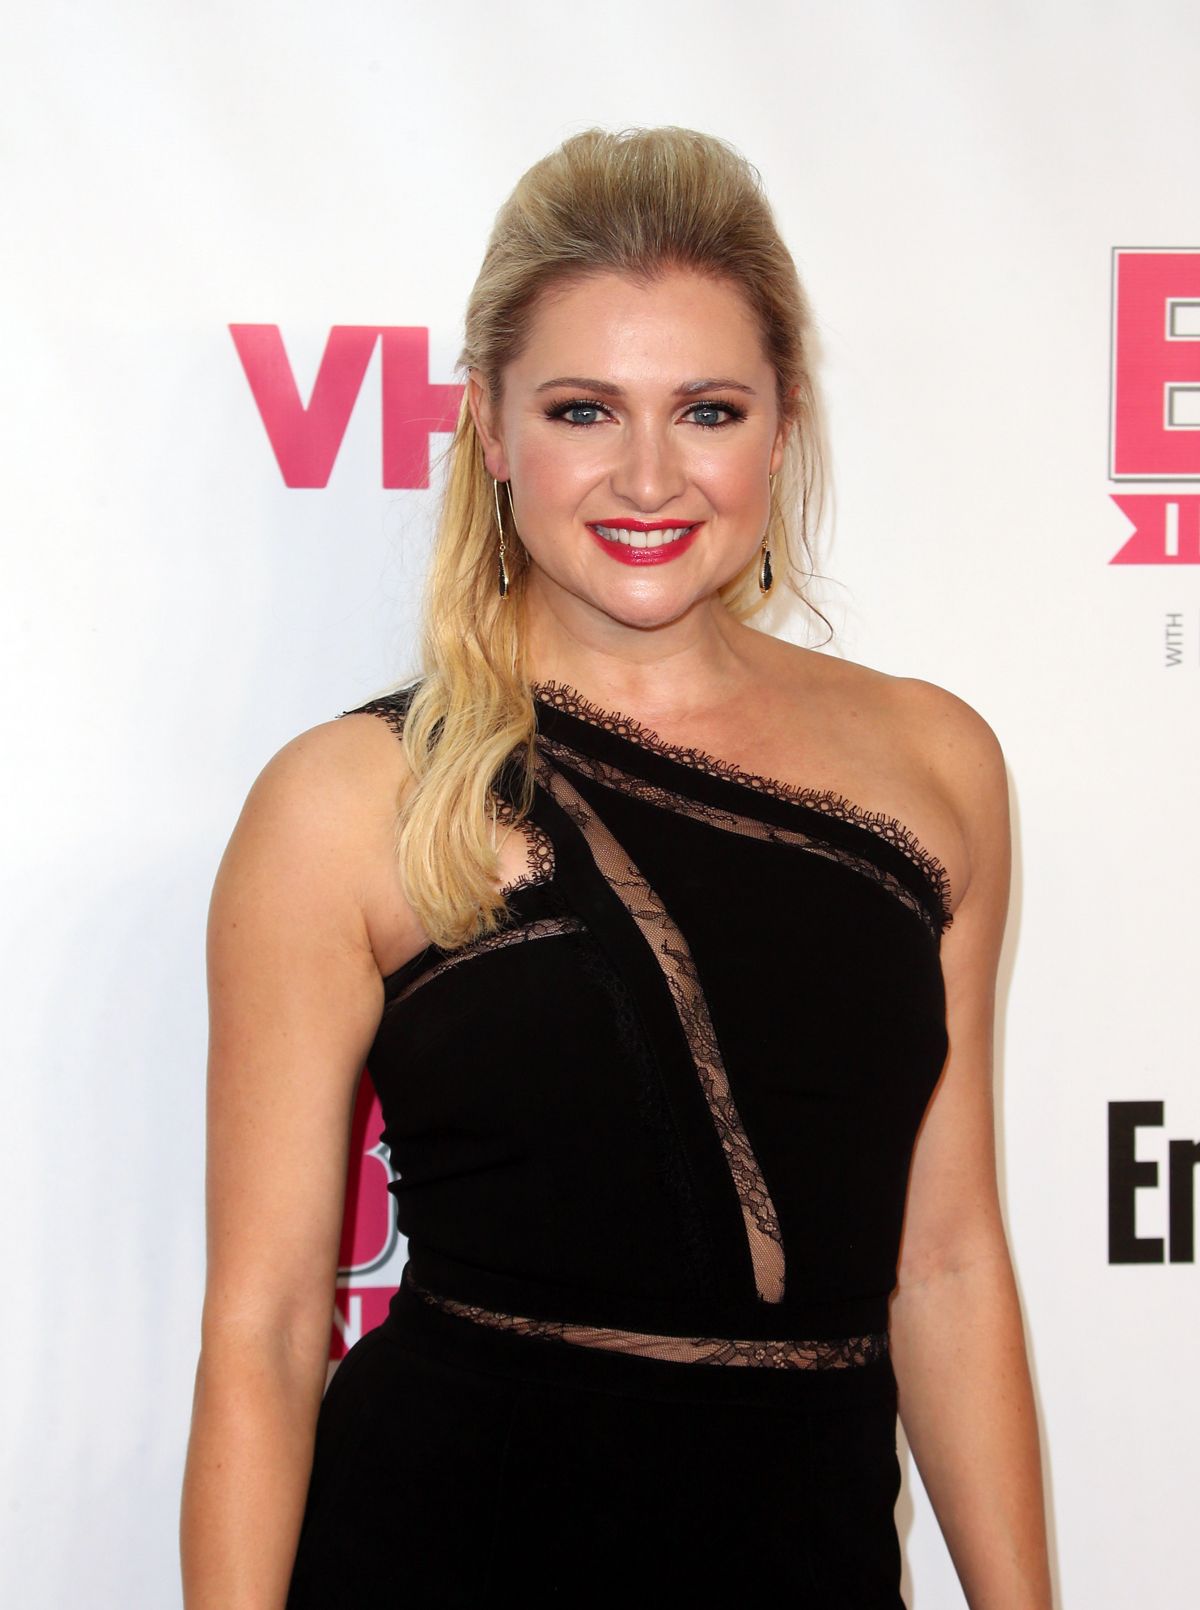 KATHERINE BAILESS at VH1 Big in 2015 With Entertainment Weekly Awards in West ...1200 x 1610